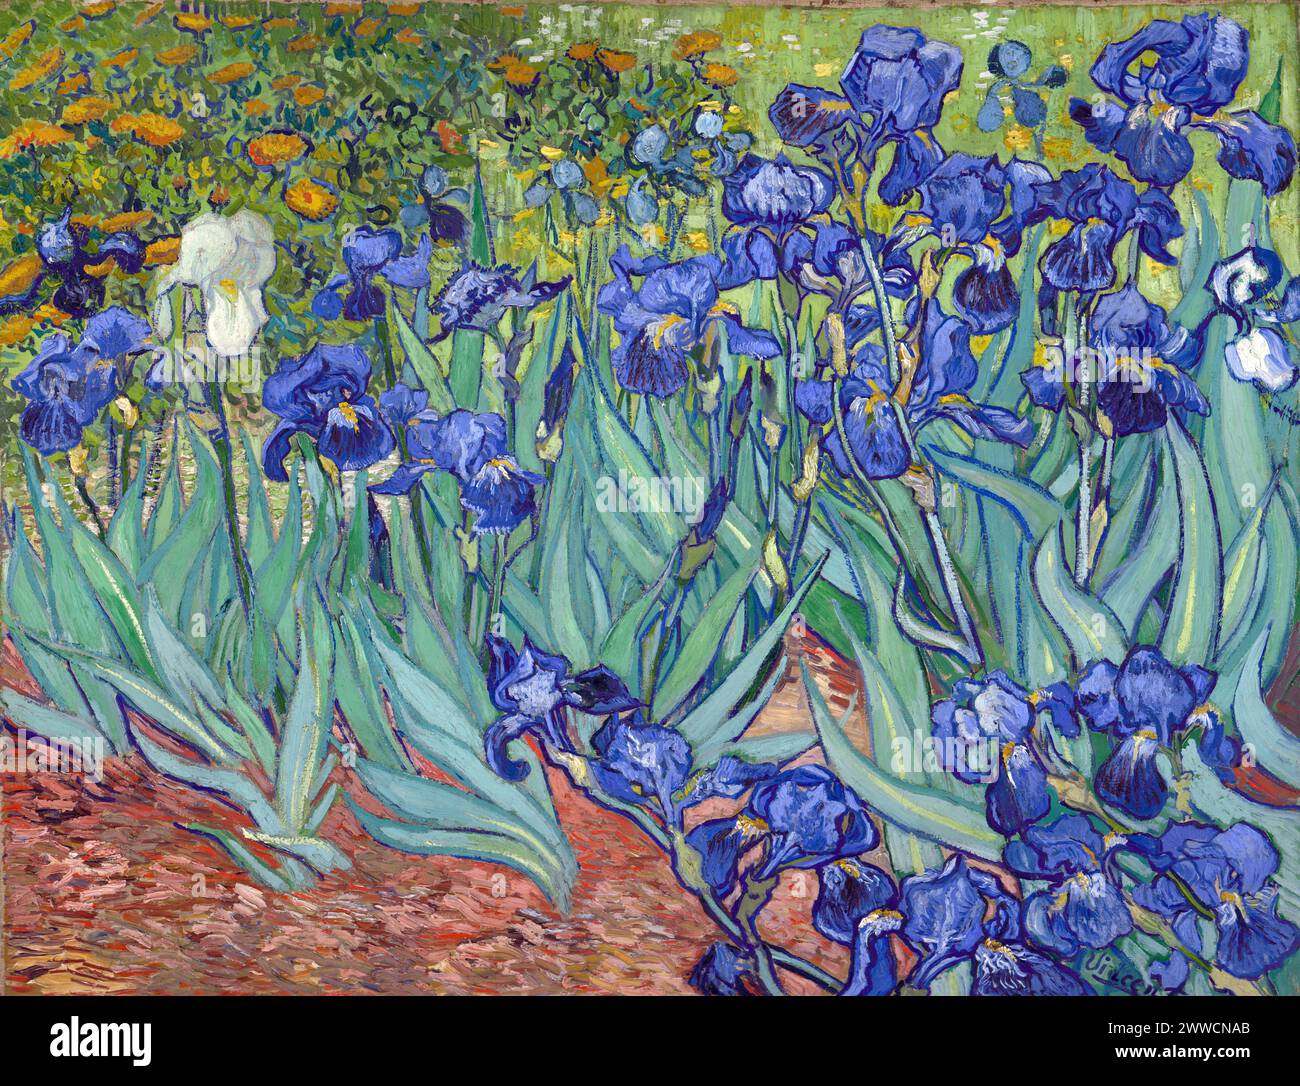 Irises is one of several paintings of irises by the Dutch artist ...